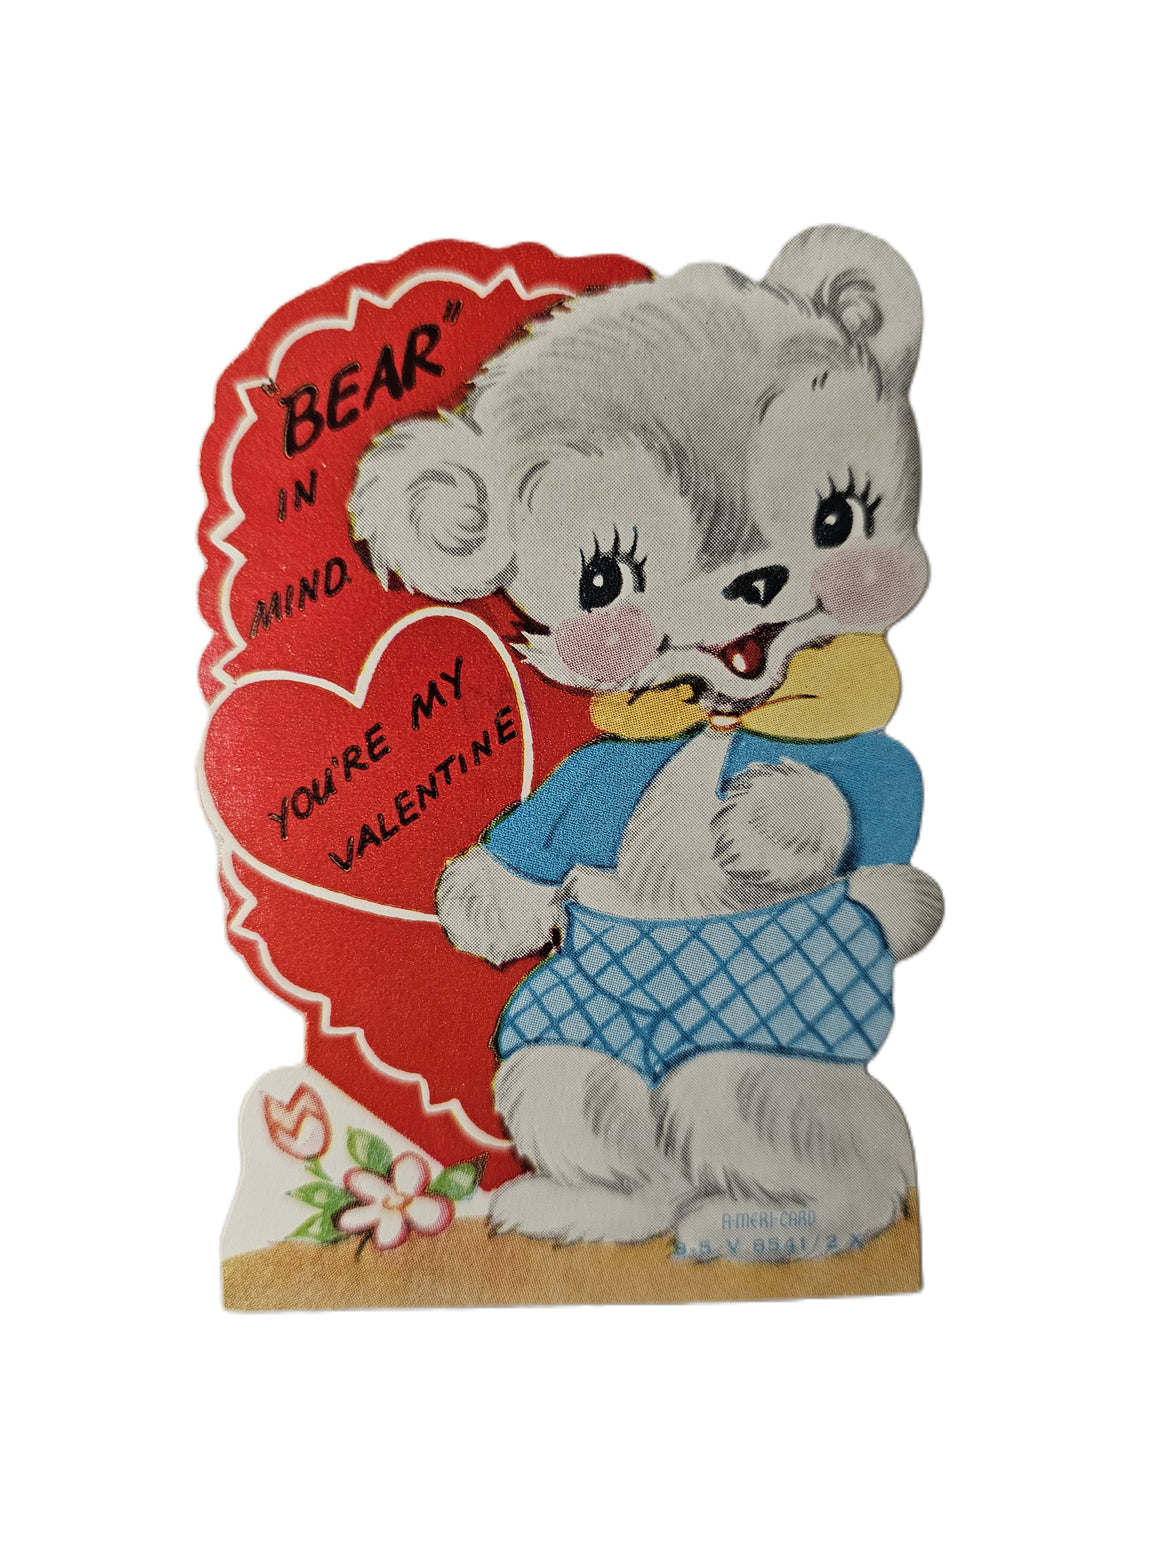 Vintage 1950s Valentine Card Teddy Bear in Suit with Hearts